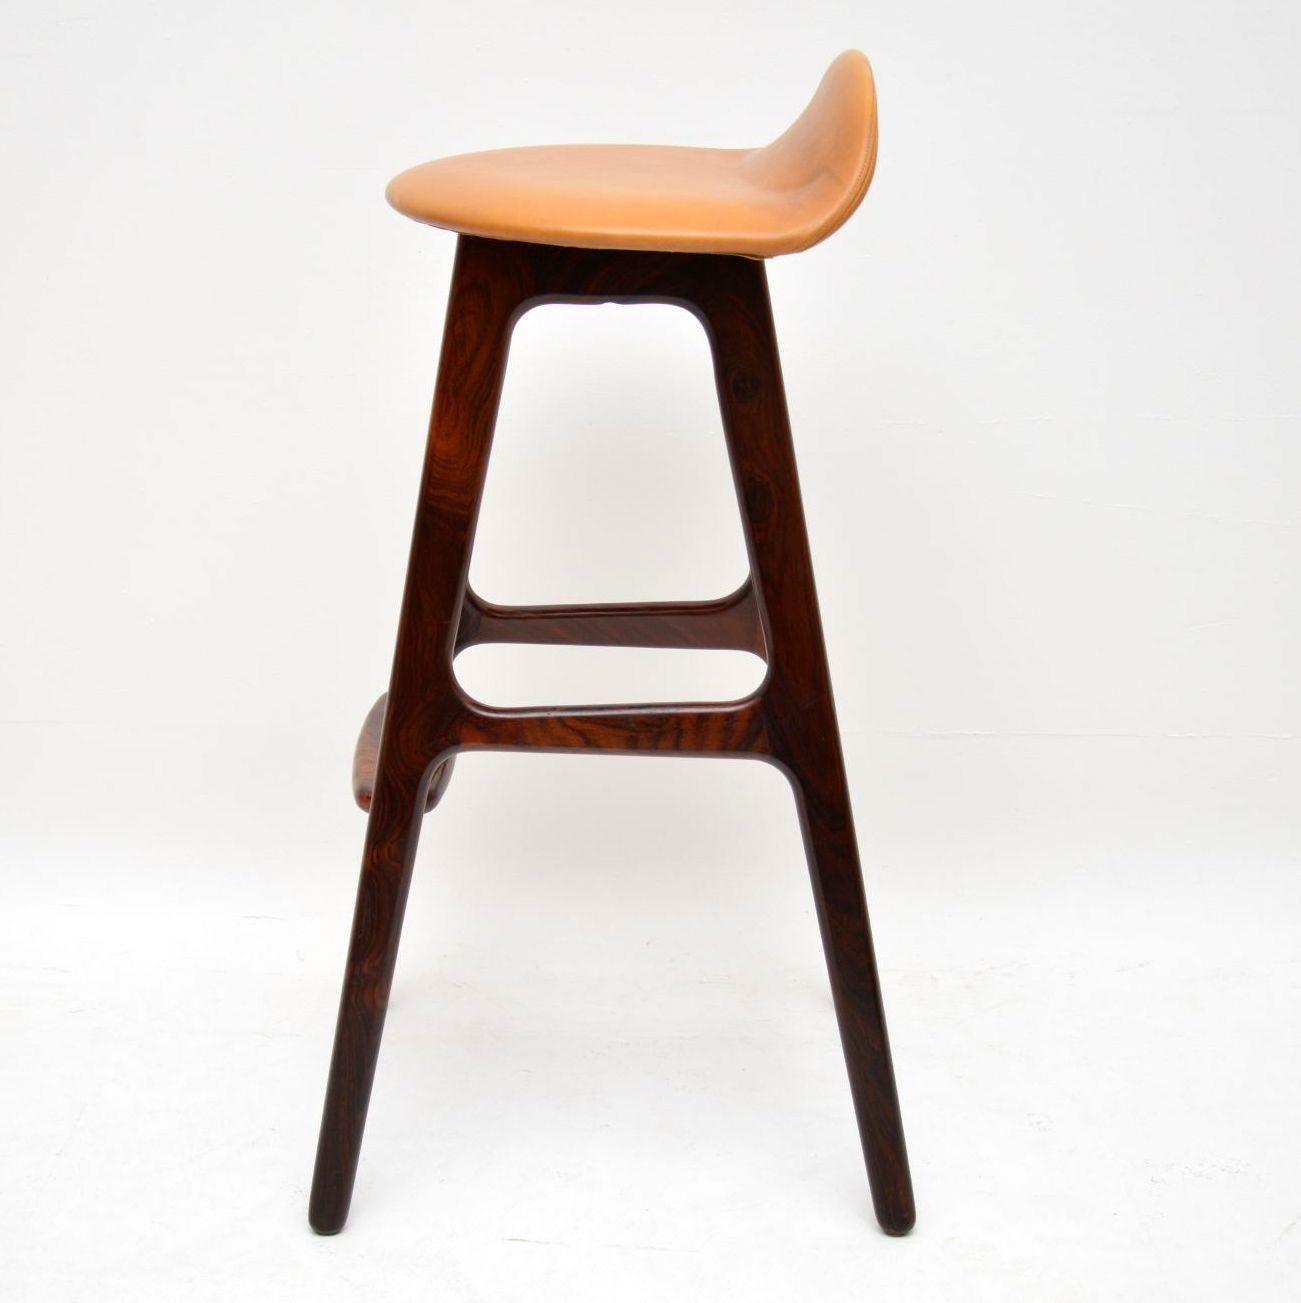 A stunning and iconic vintage bar stool made in Denmark, this was designed by Erik Buch, it dates from the 1960s. It has an absolutely beautiful grain patterns and a gorgeous color. The condition is excellent, this is clean, sturdy and sound, with